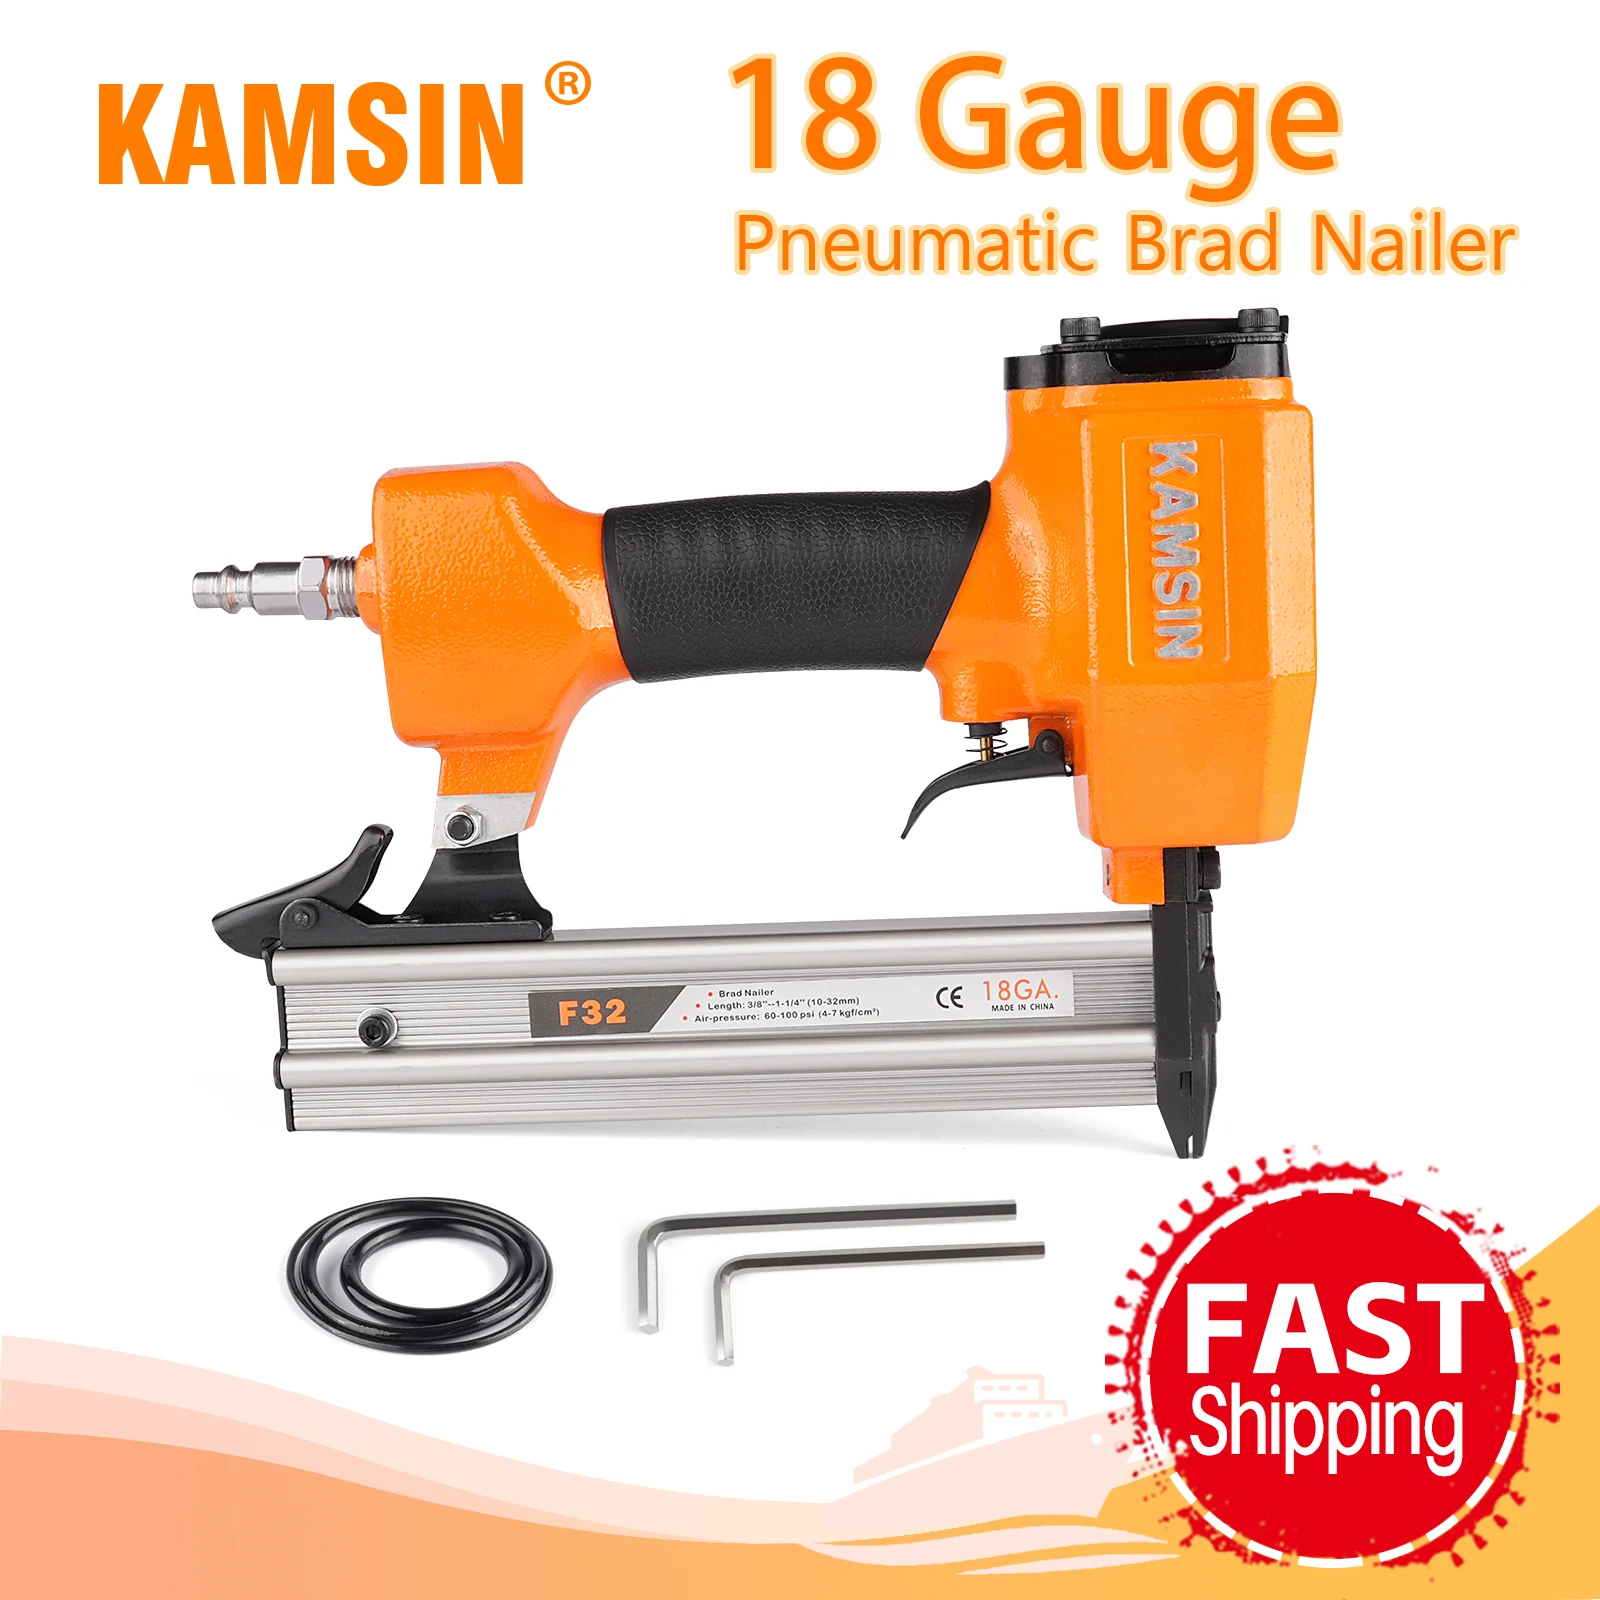 KAMSIN F32 18 Gauge Pneumatic Compact Brad Nailer, Fits 10-32mm Nails,  Air Power Finish Nail Gun for DIY Project, Furniture 100pcs lot picture hanging nails hardware nail kit fits picture hangers holds up to 5 30 lbs 0 05 inch